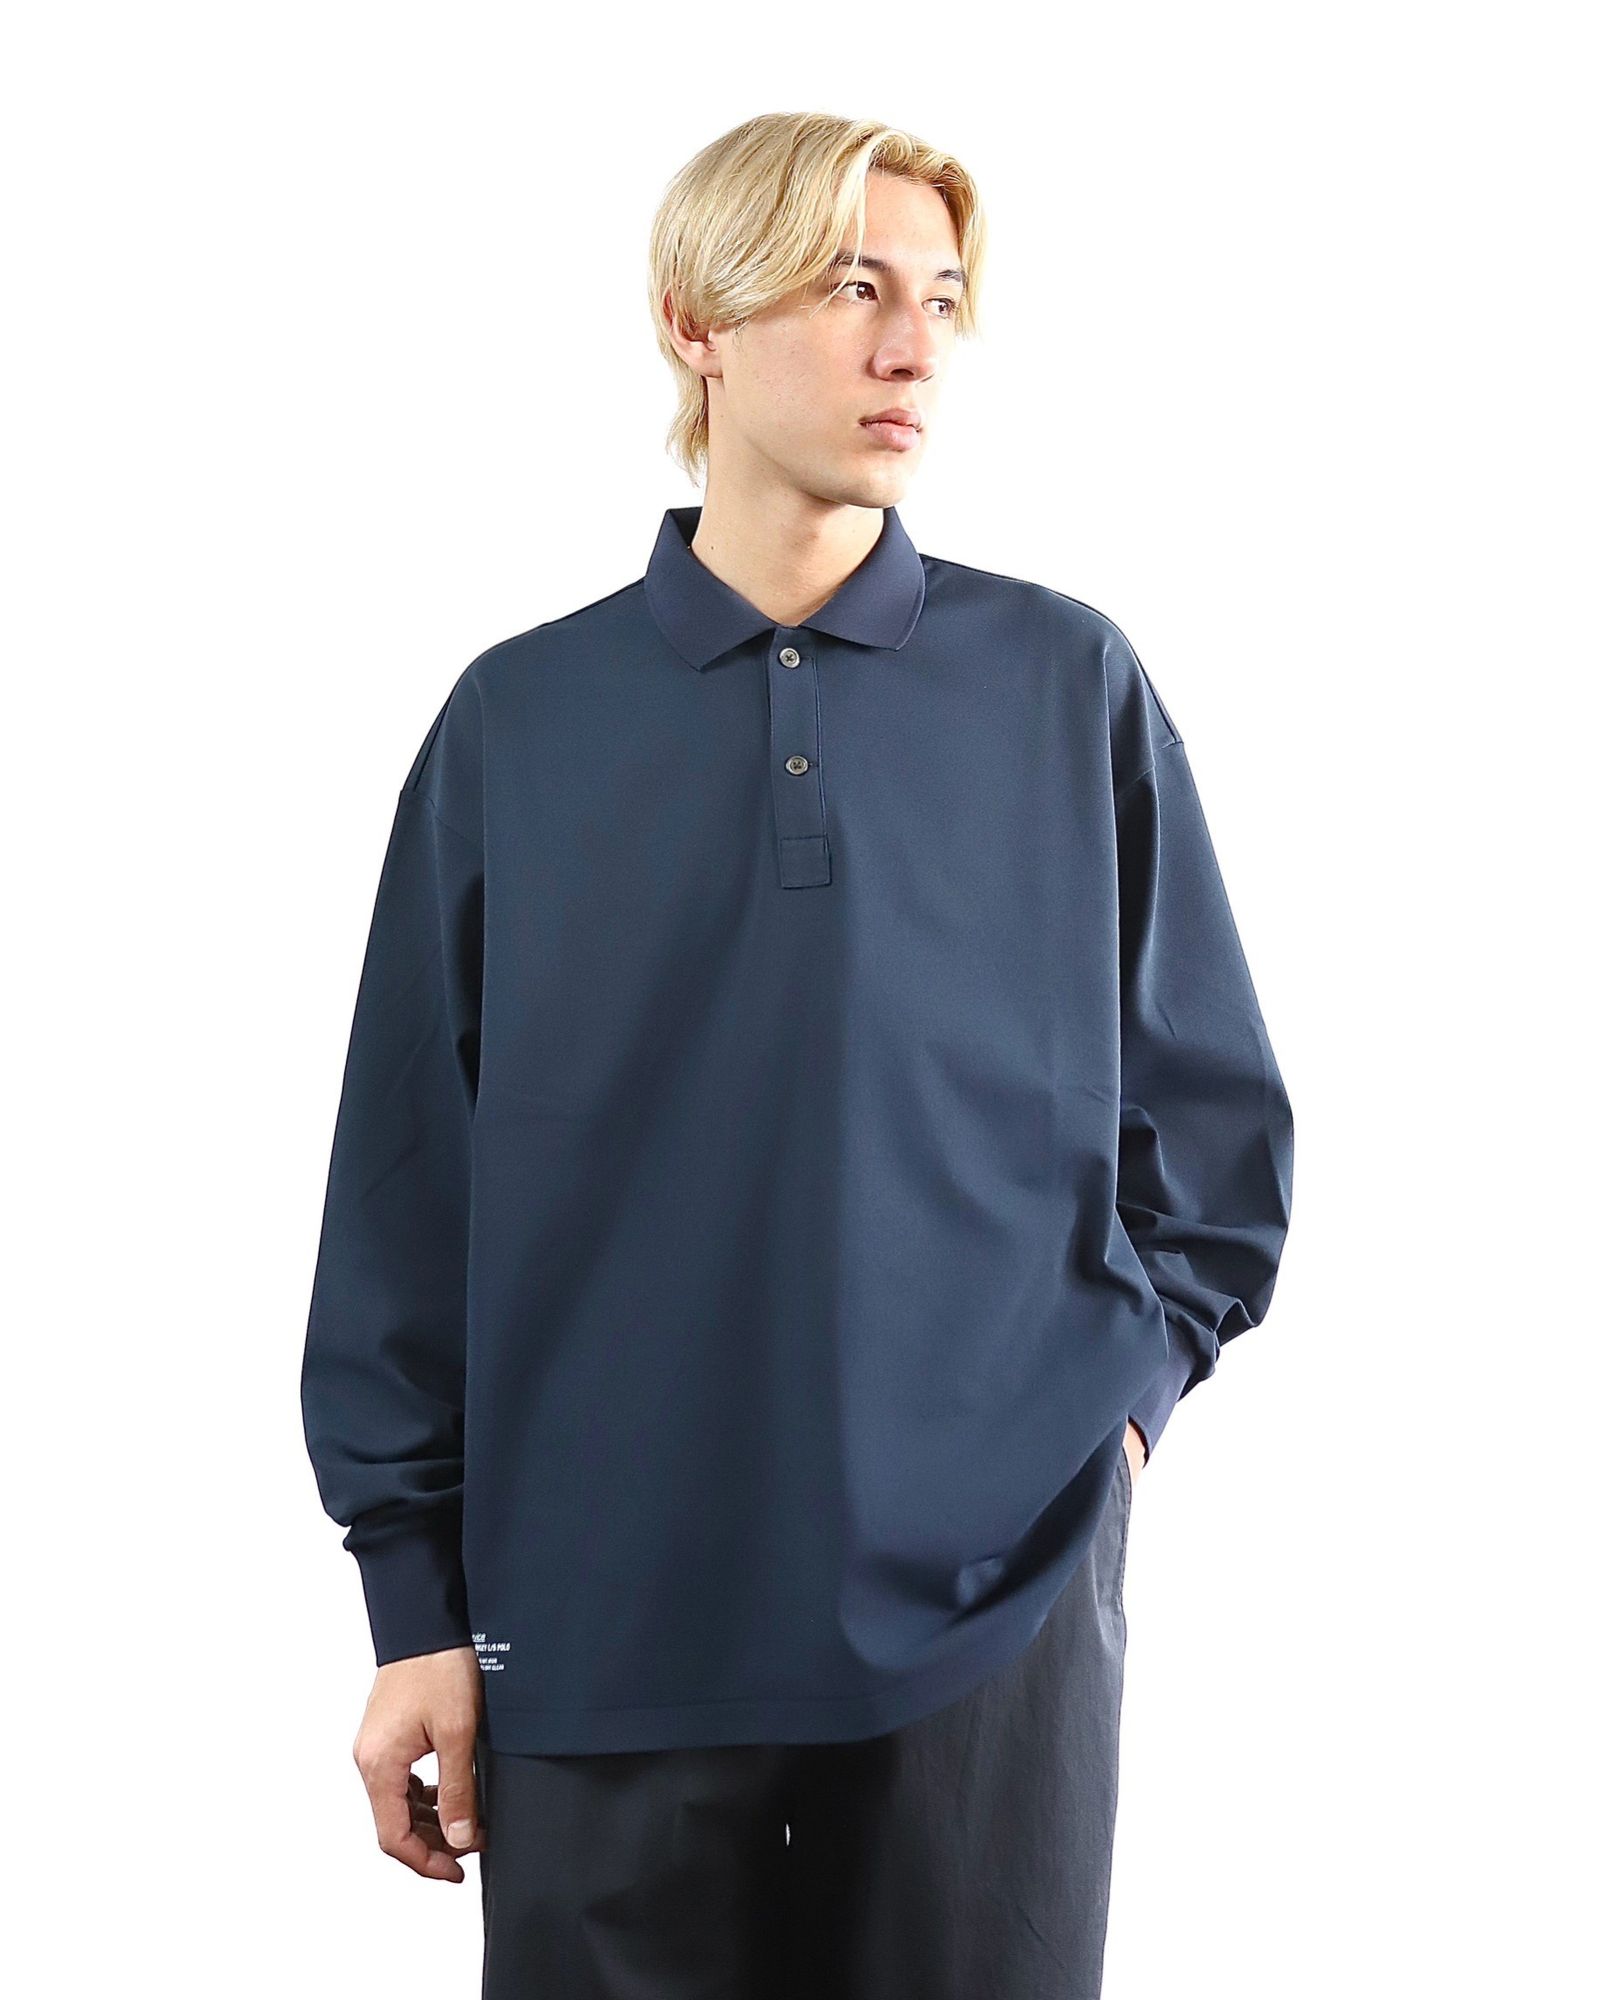 FreshService 24SS 新作DRY PIQUE JERSEY L/S POLO(NAVY) style 2024.3 